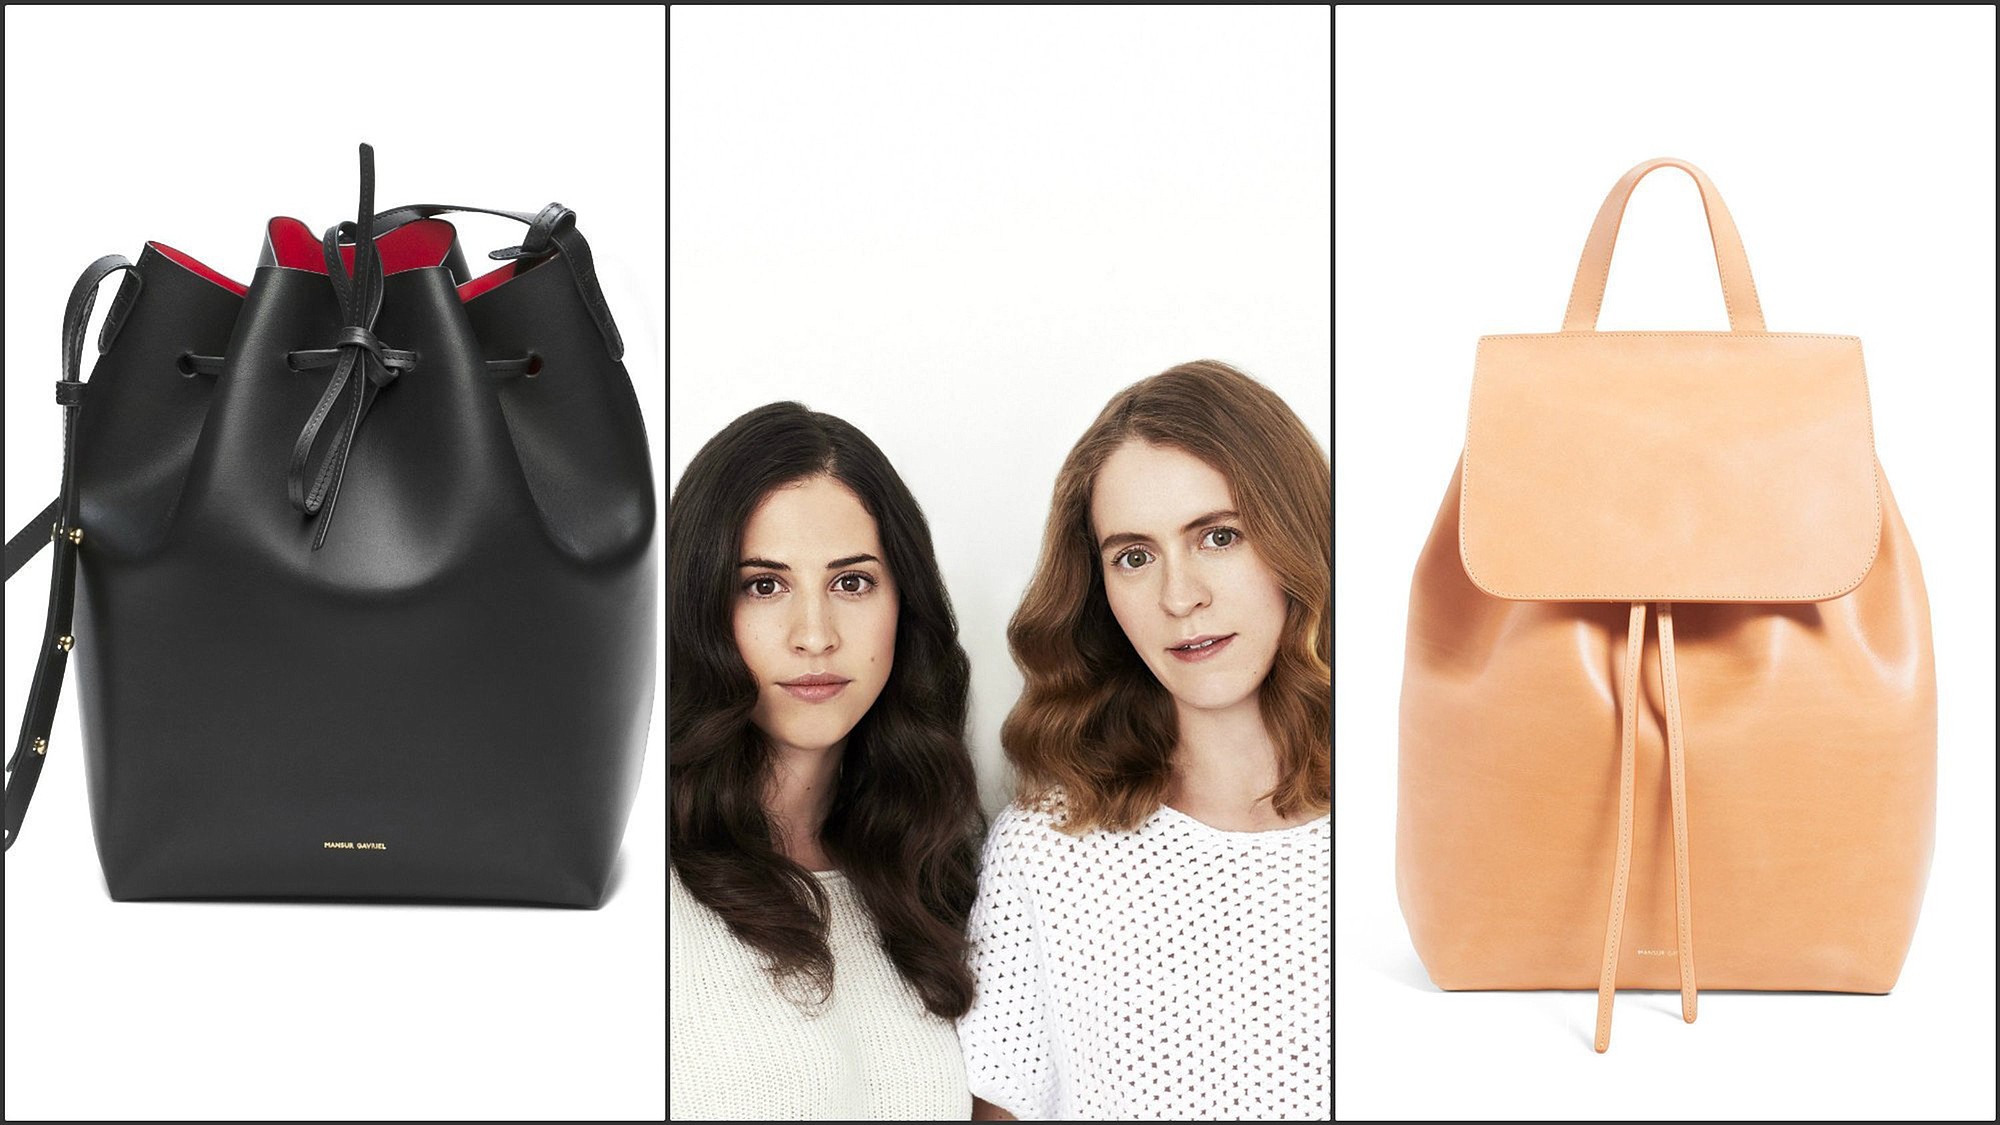 A bucket bag, left, and a backpack from Mansur Gavriel, a label that caters to women who want luxe and value without glaring logos or labeling.